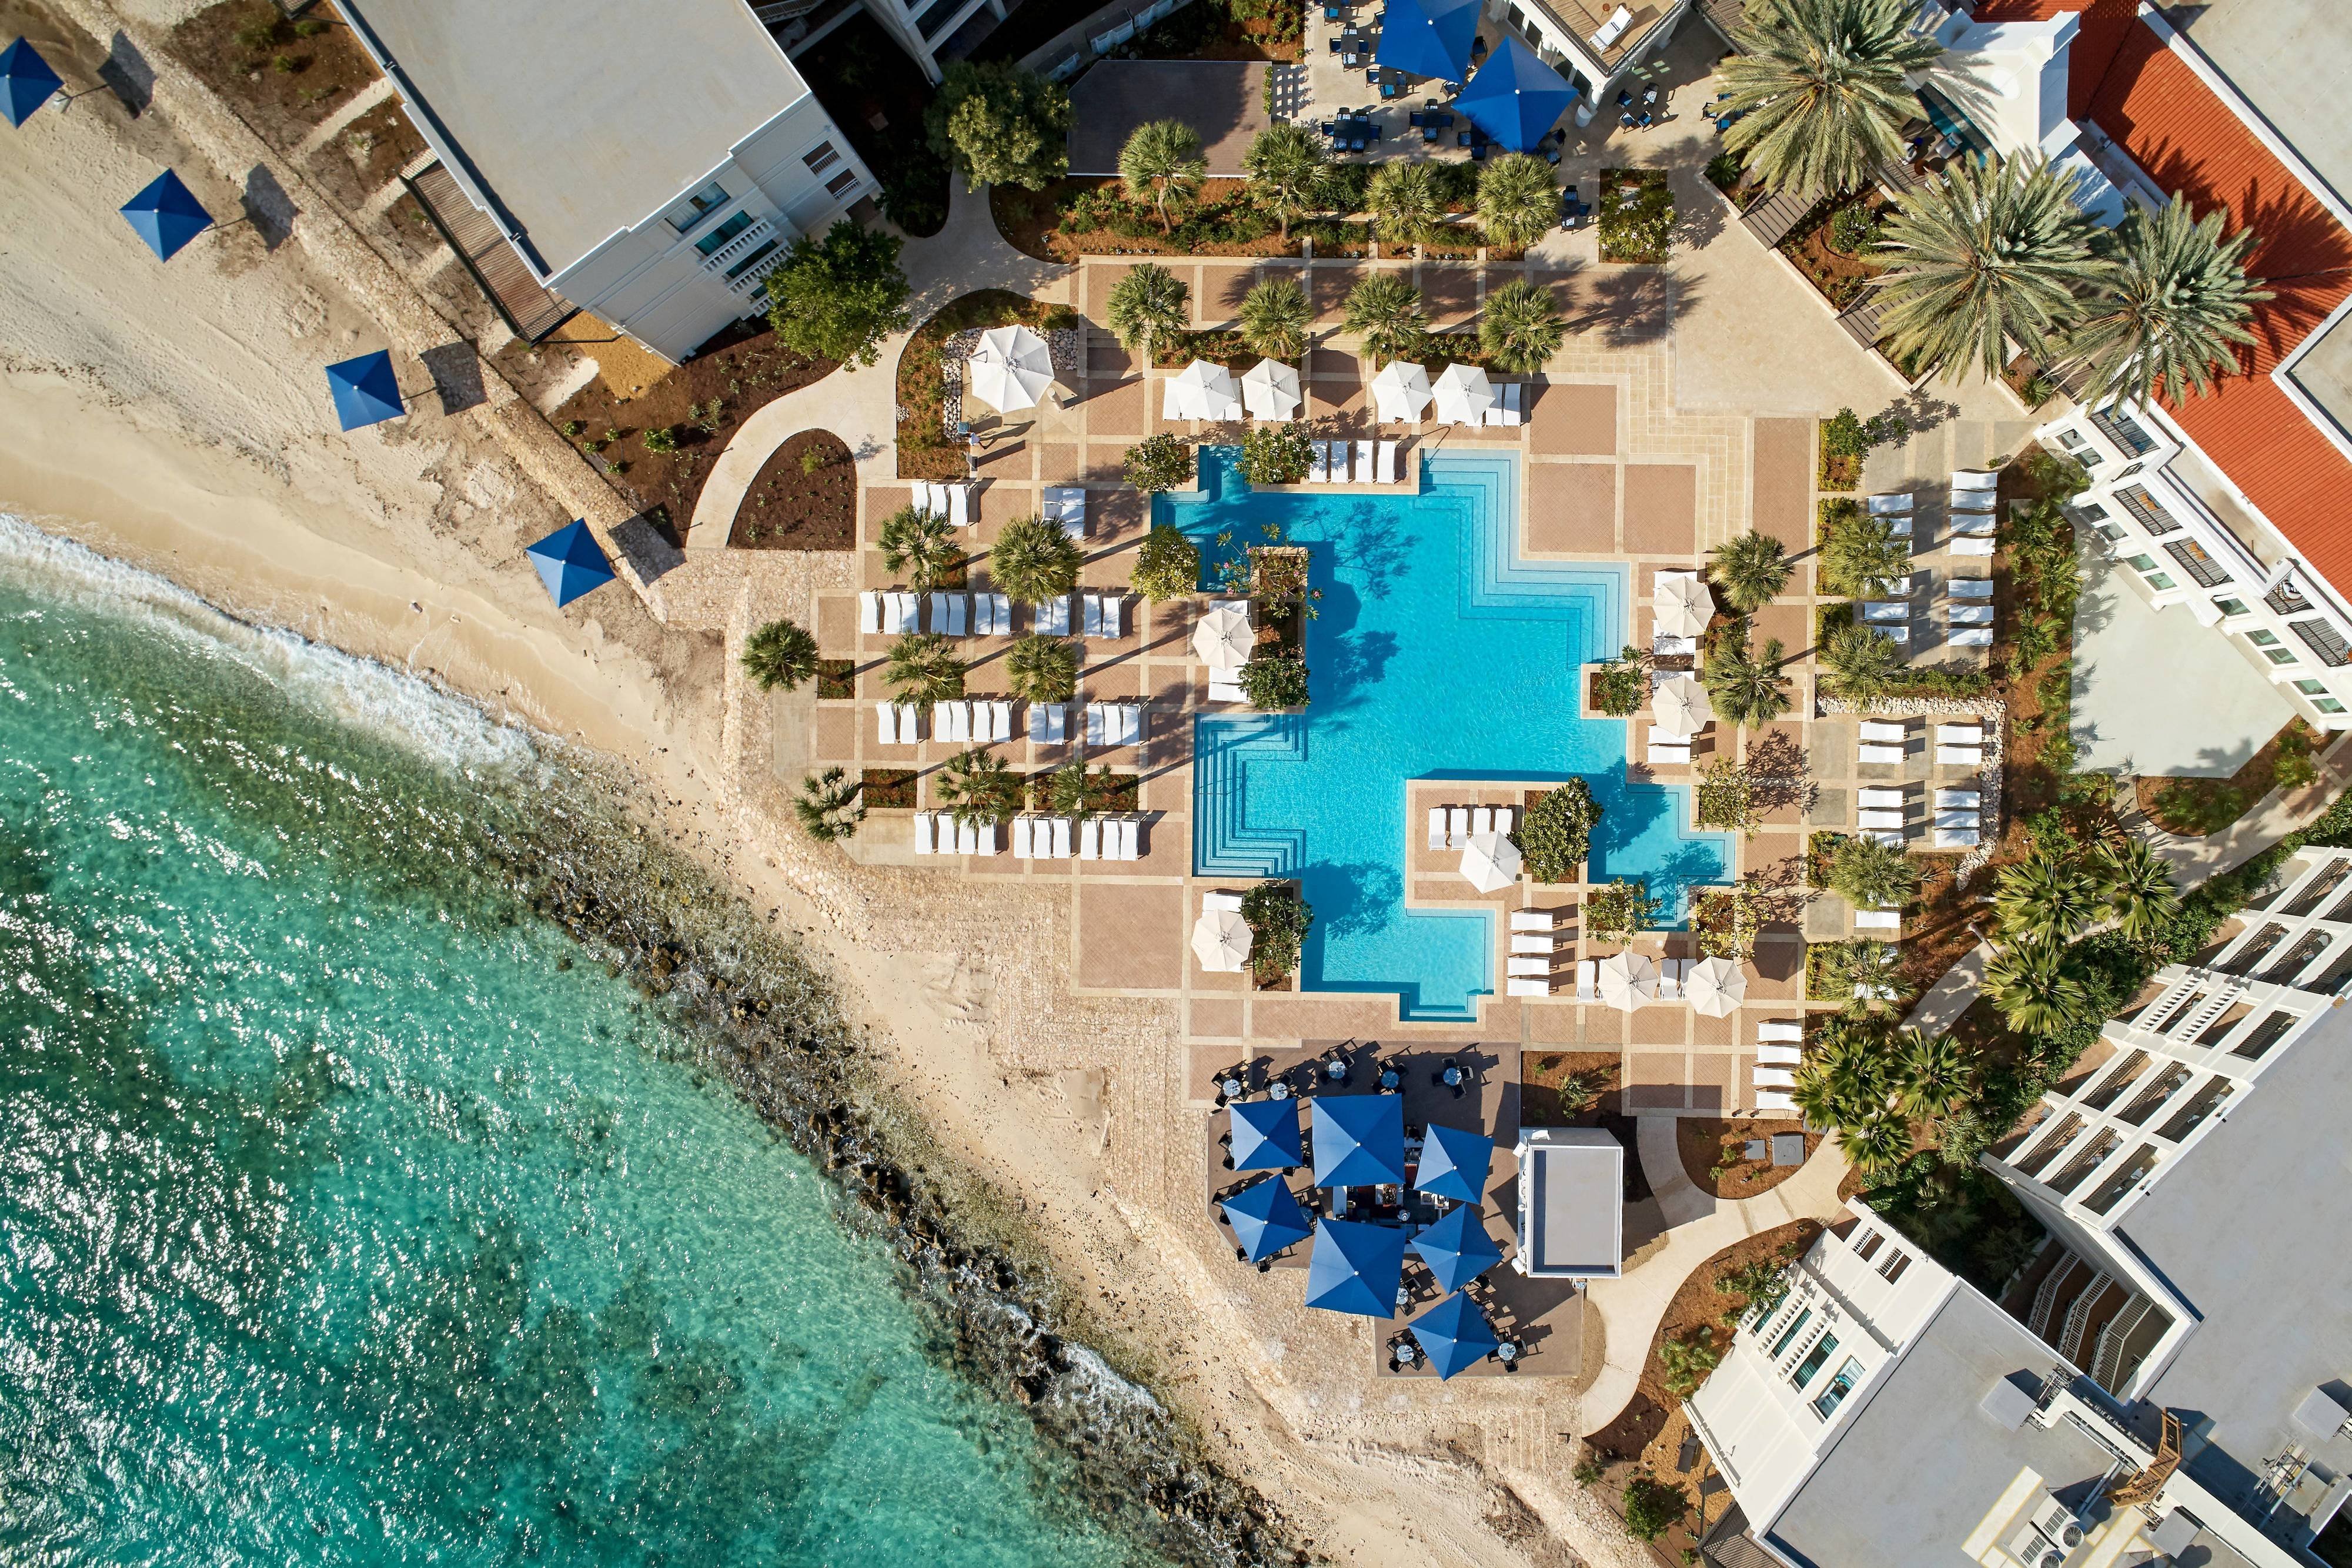 Curacao Marriott Beach Resort- First Class Willemstad, Curacao Hotels- GDS  Reservation Codes: Travel Weekly